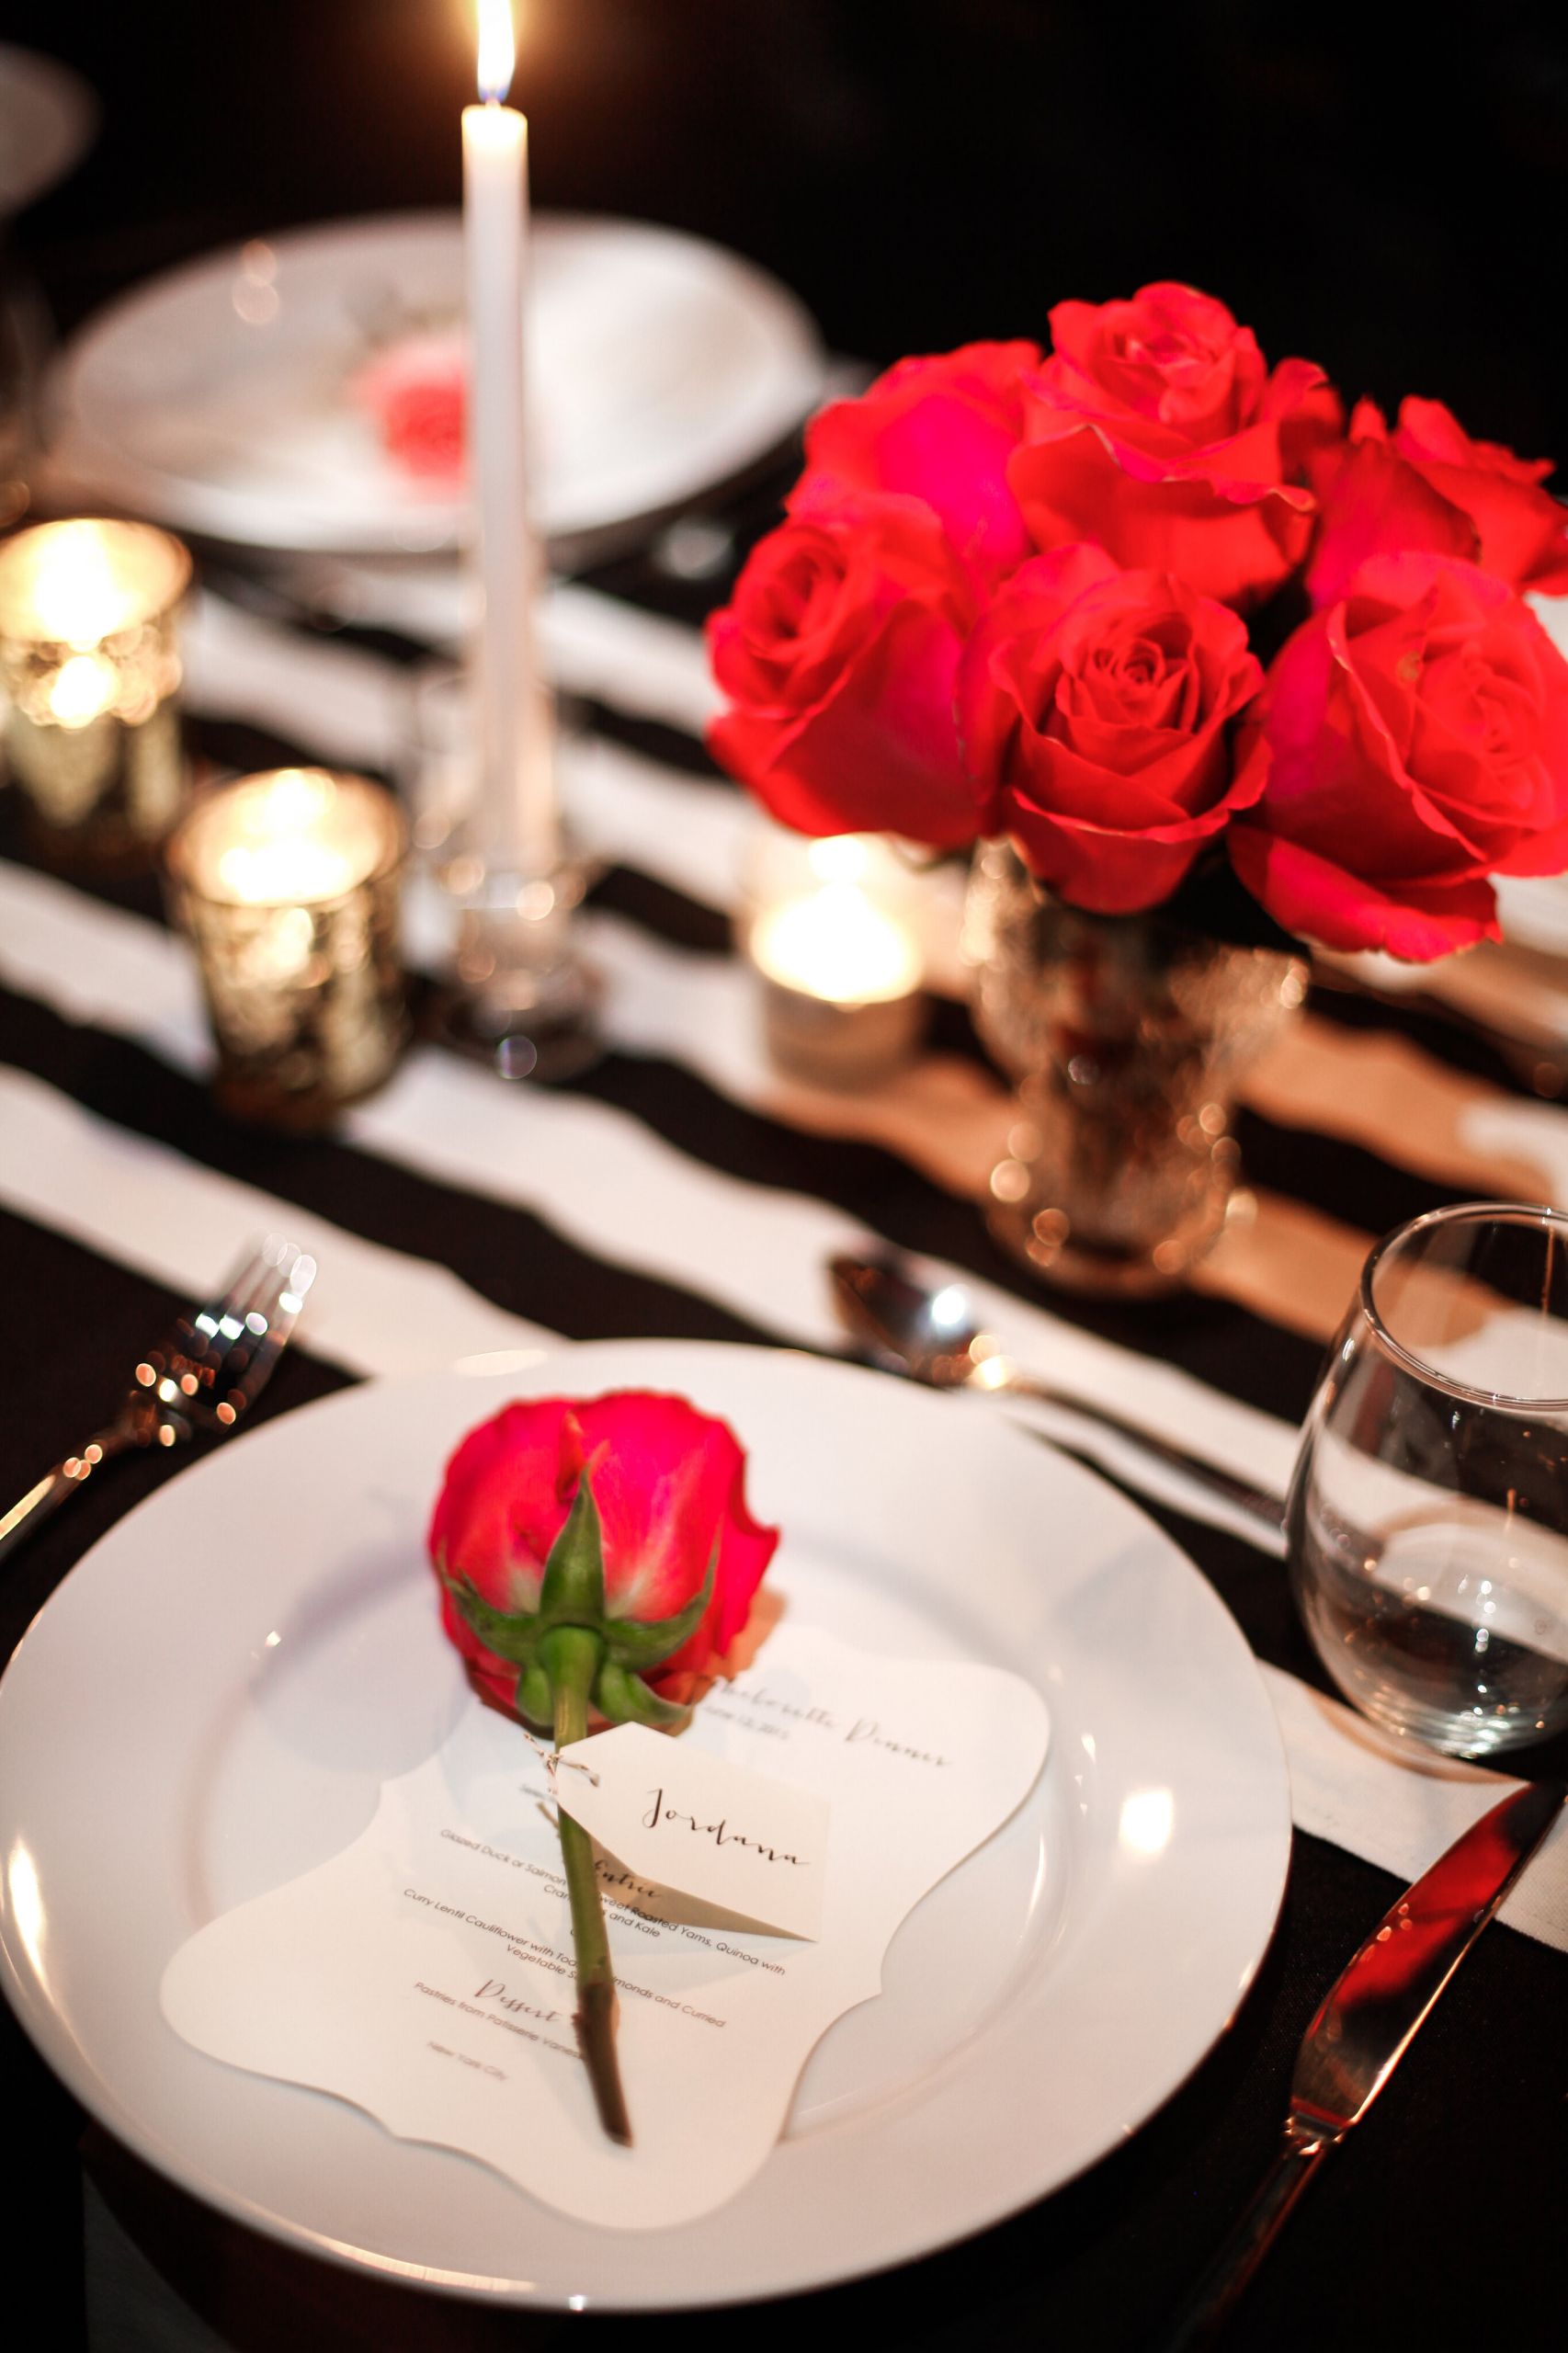 Bachelorette Party Dinner Ideas Nyc
 Intimate Parisian Bachelorette Party Dinner TrueBlu